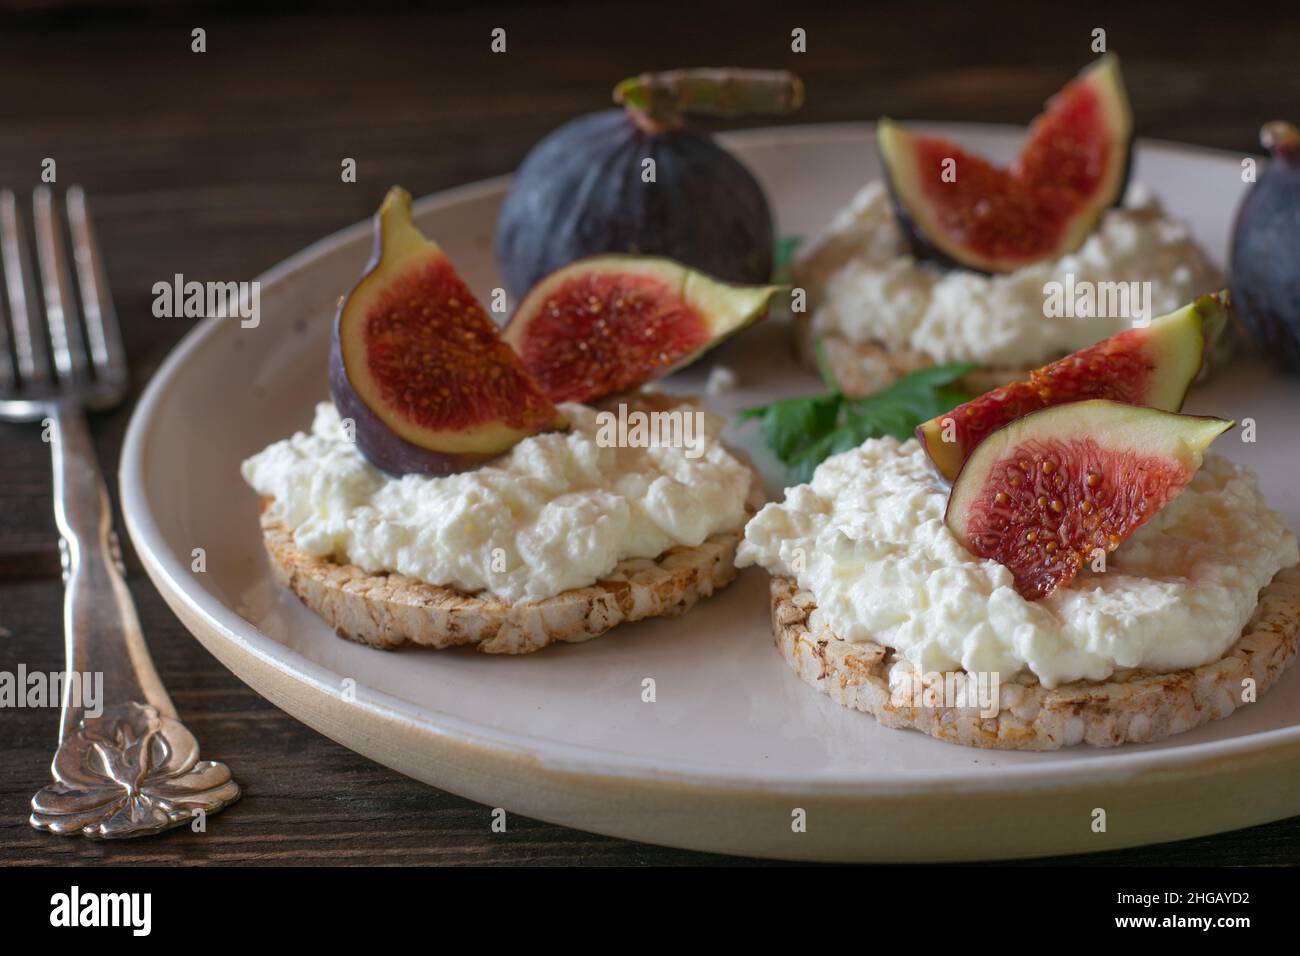 Healthy breakfast plate for diet or dieting with gluten free brown rice cracker topped with cottage cheese and fresh figs Stock Photo